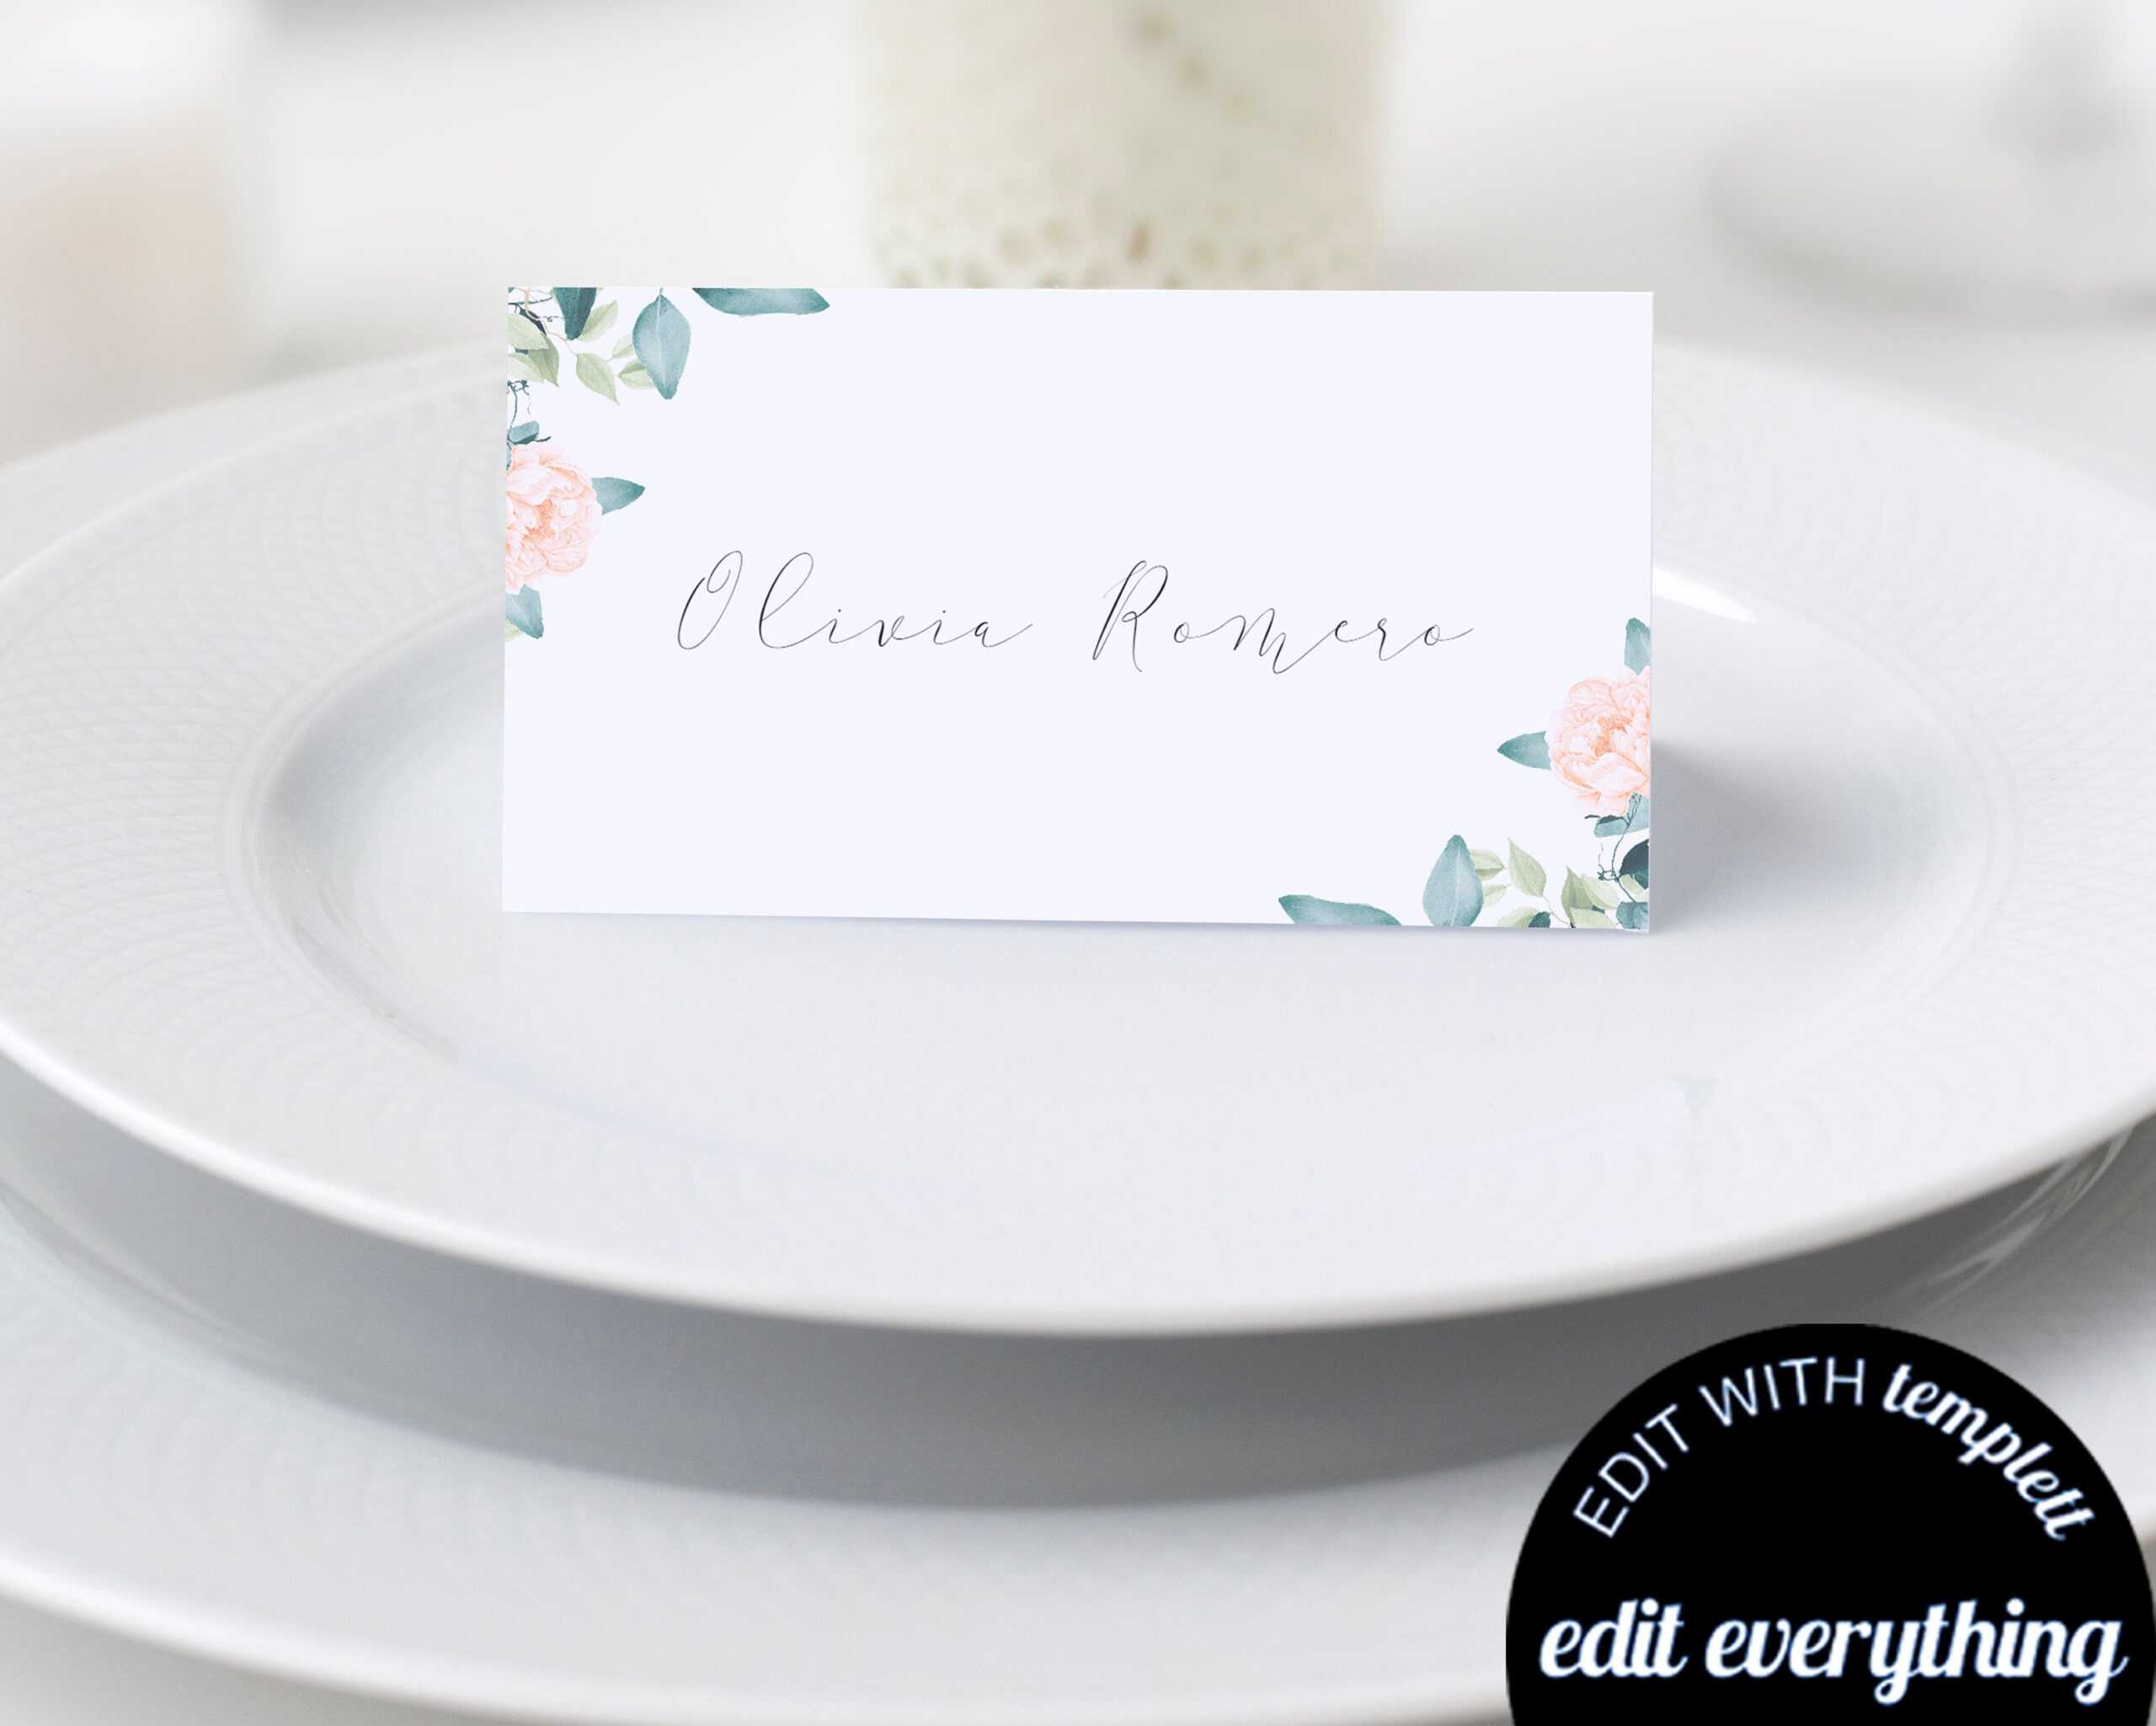 019 Template For Place Cards Il Fullxfull 1542140750 Dg3V Pertaining To Free Template For Place Cards 6 Per Sheet